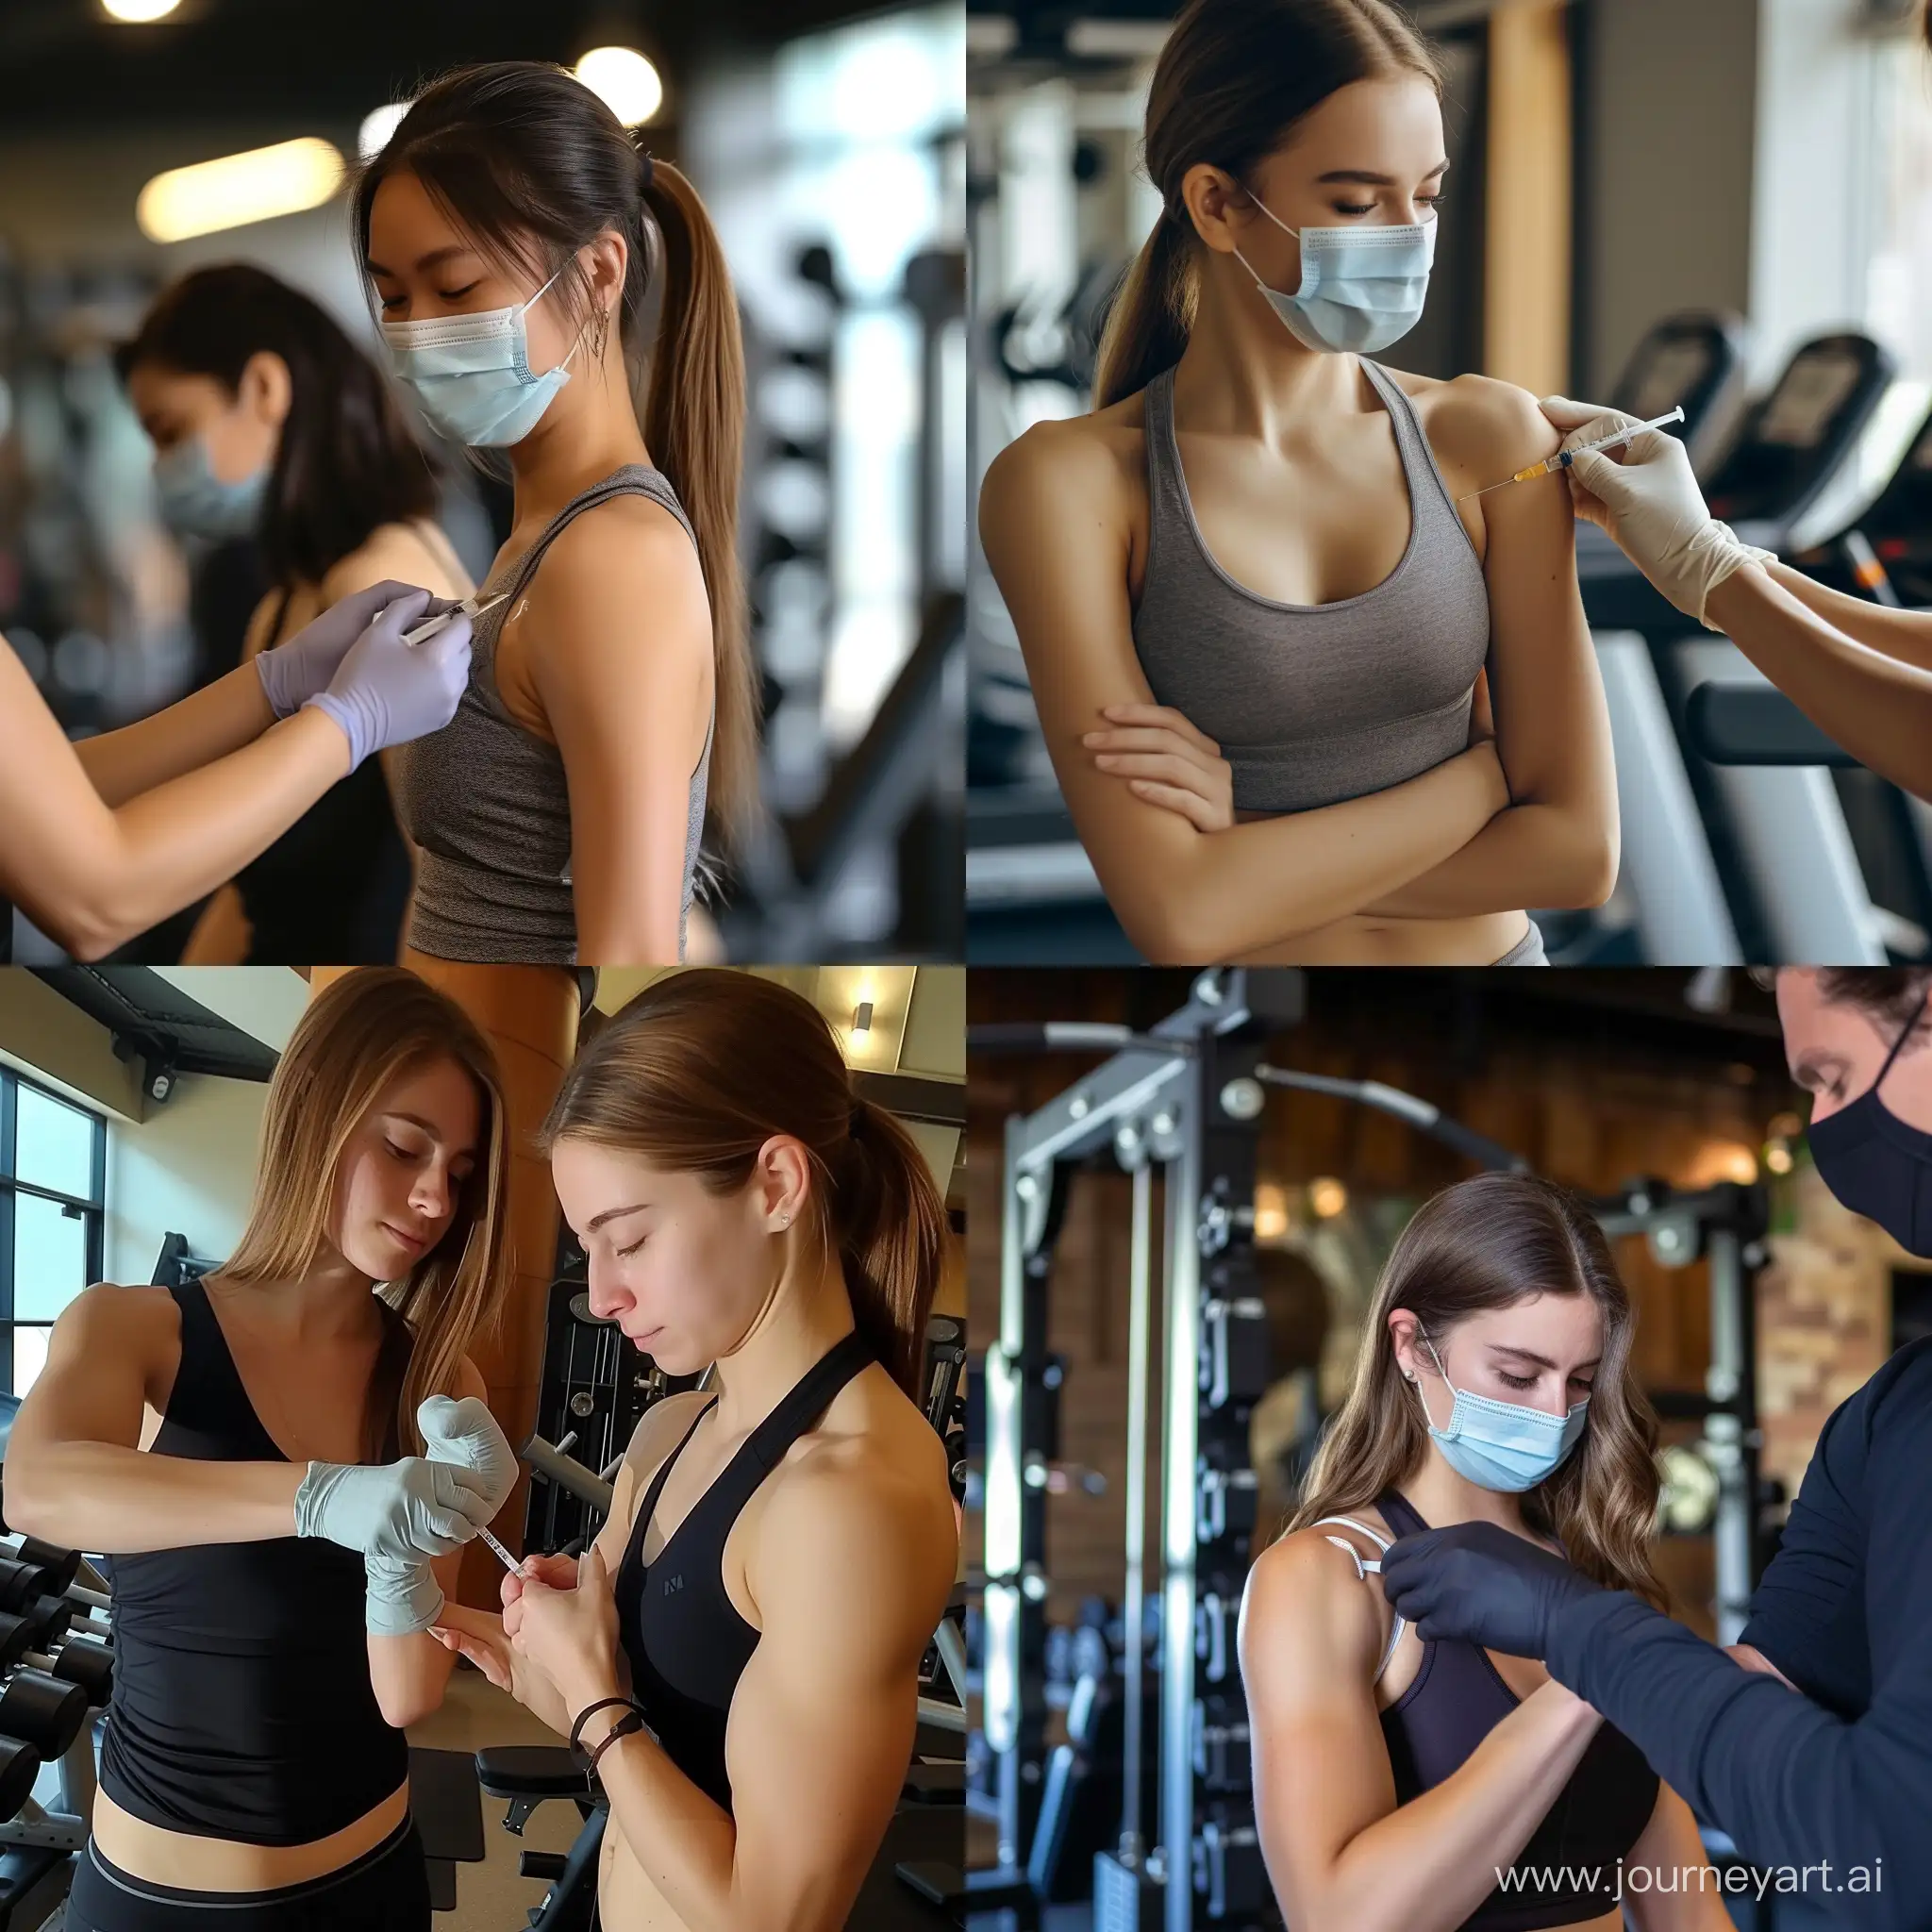 Young-Girl-Receives-Vaccination-in-Gym-Setting